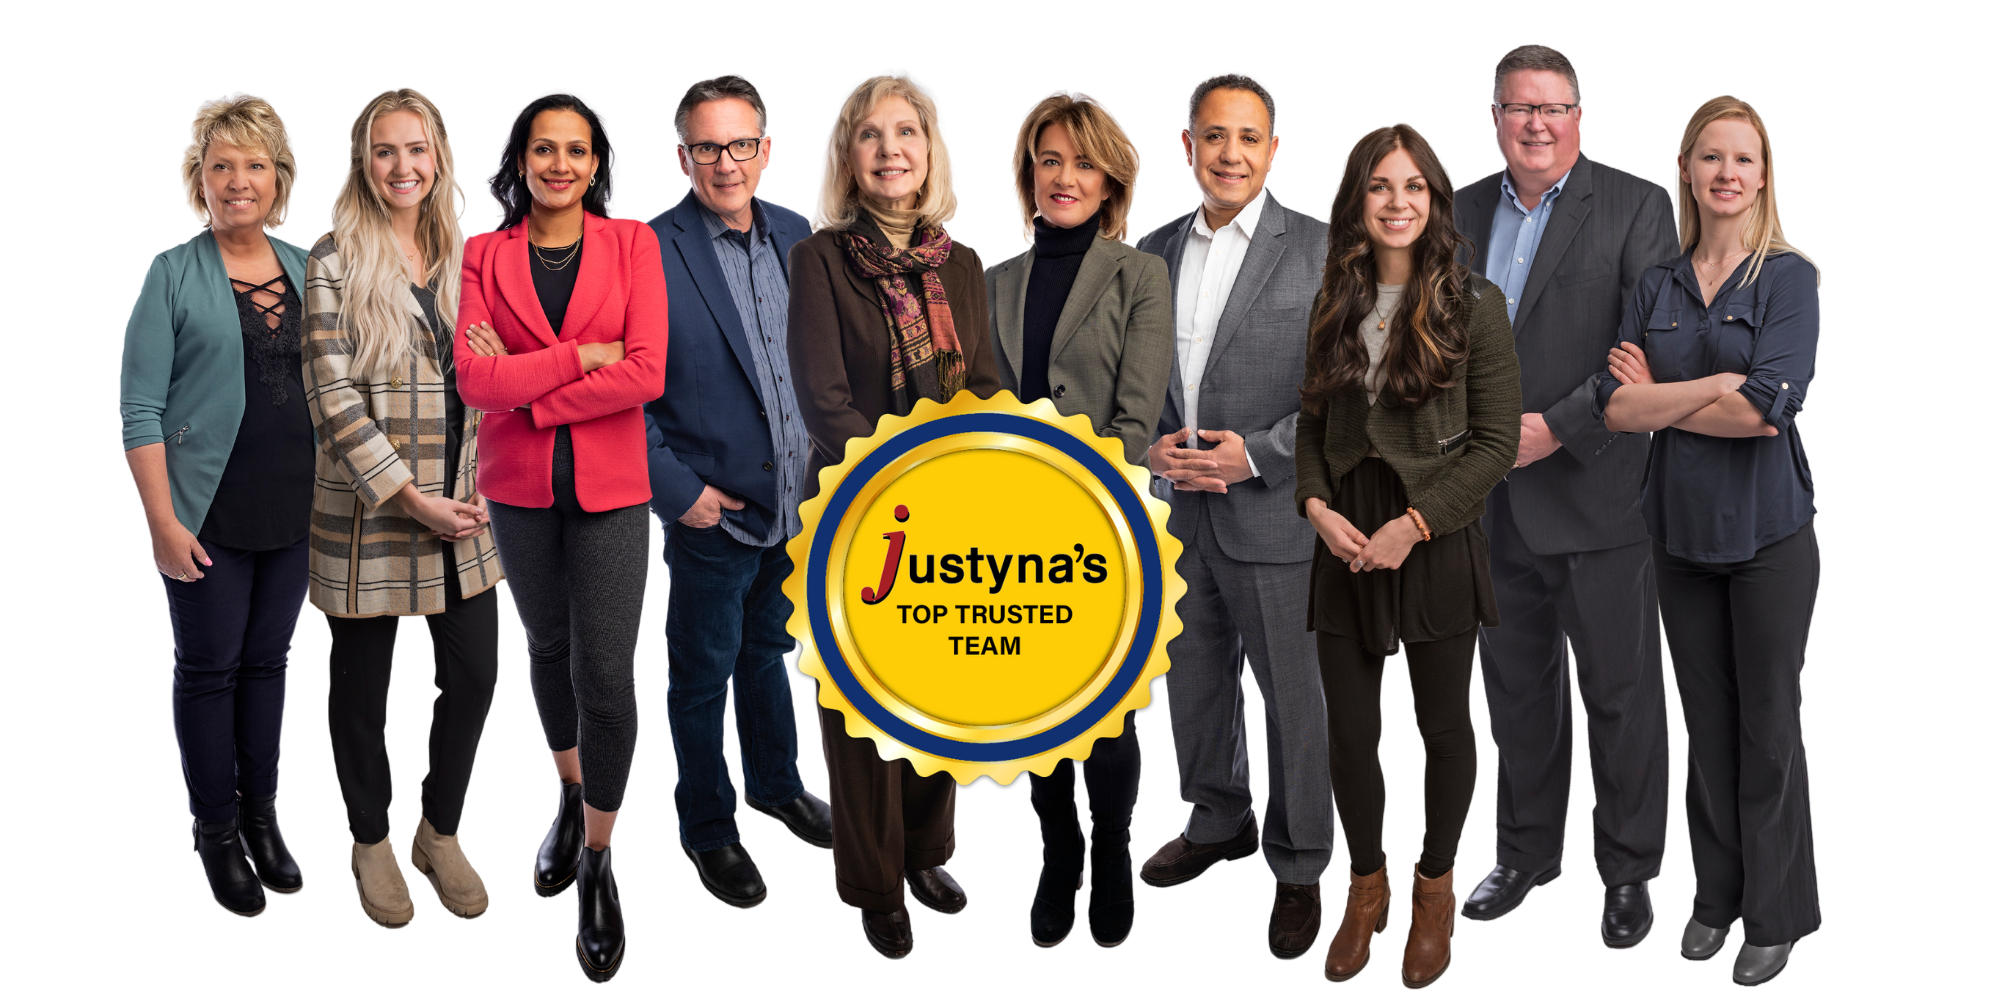 Justyna's Top Trusted Team large